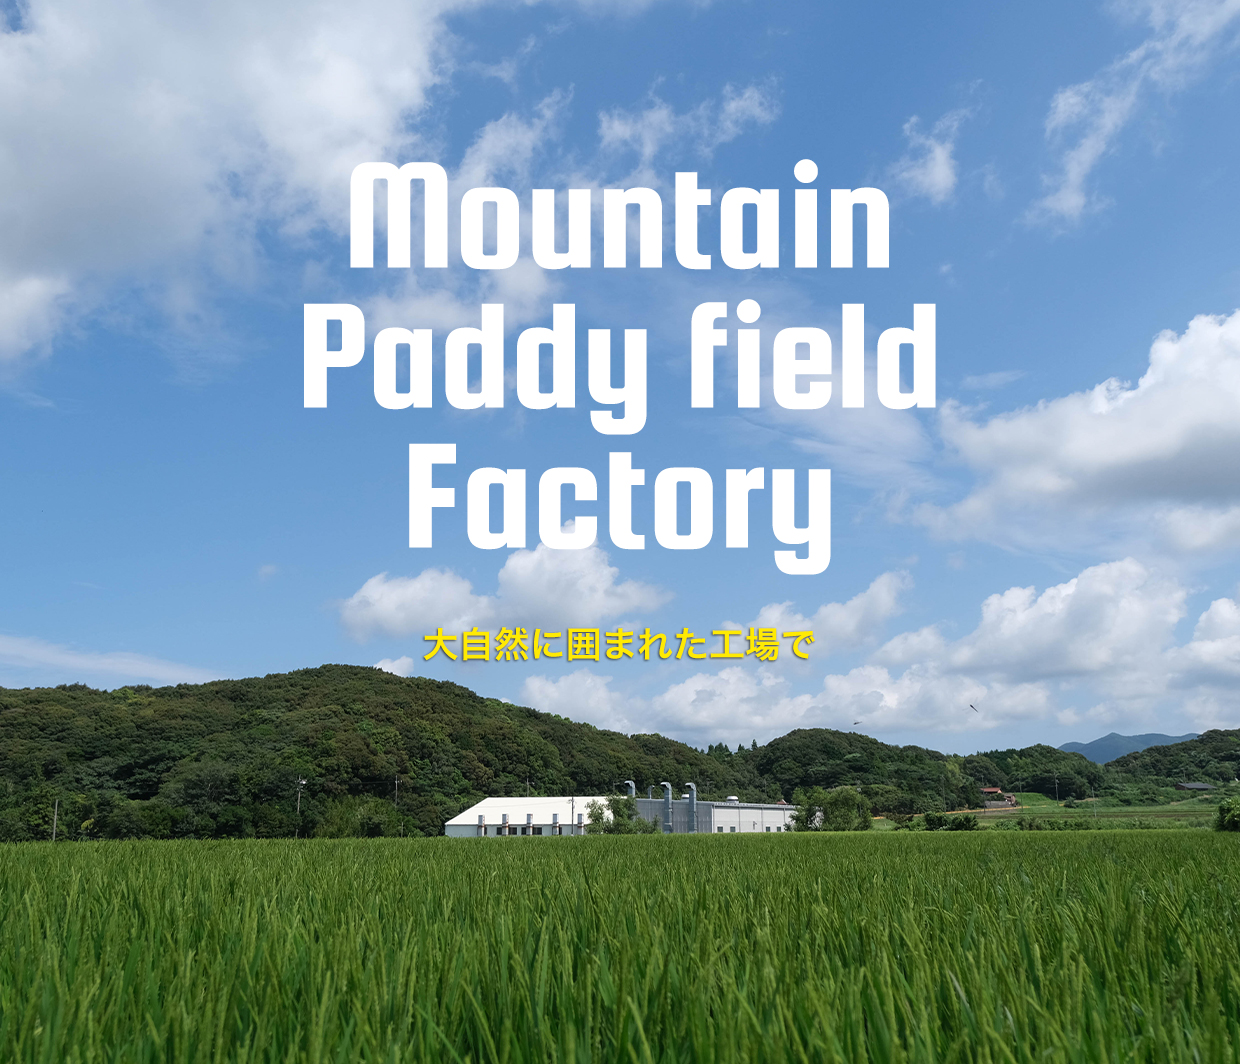 Mountain Paddy field Factory　大自然に囲まれた工場で